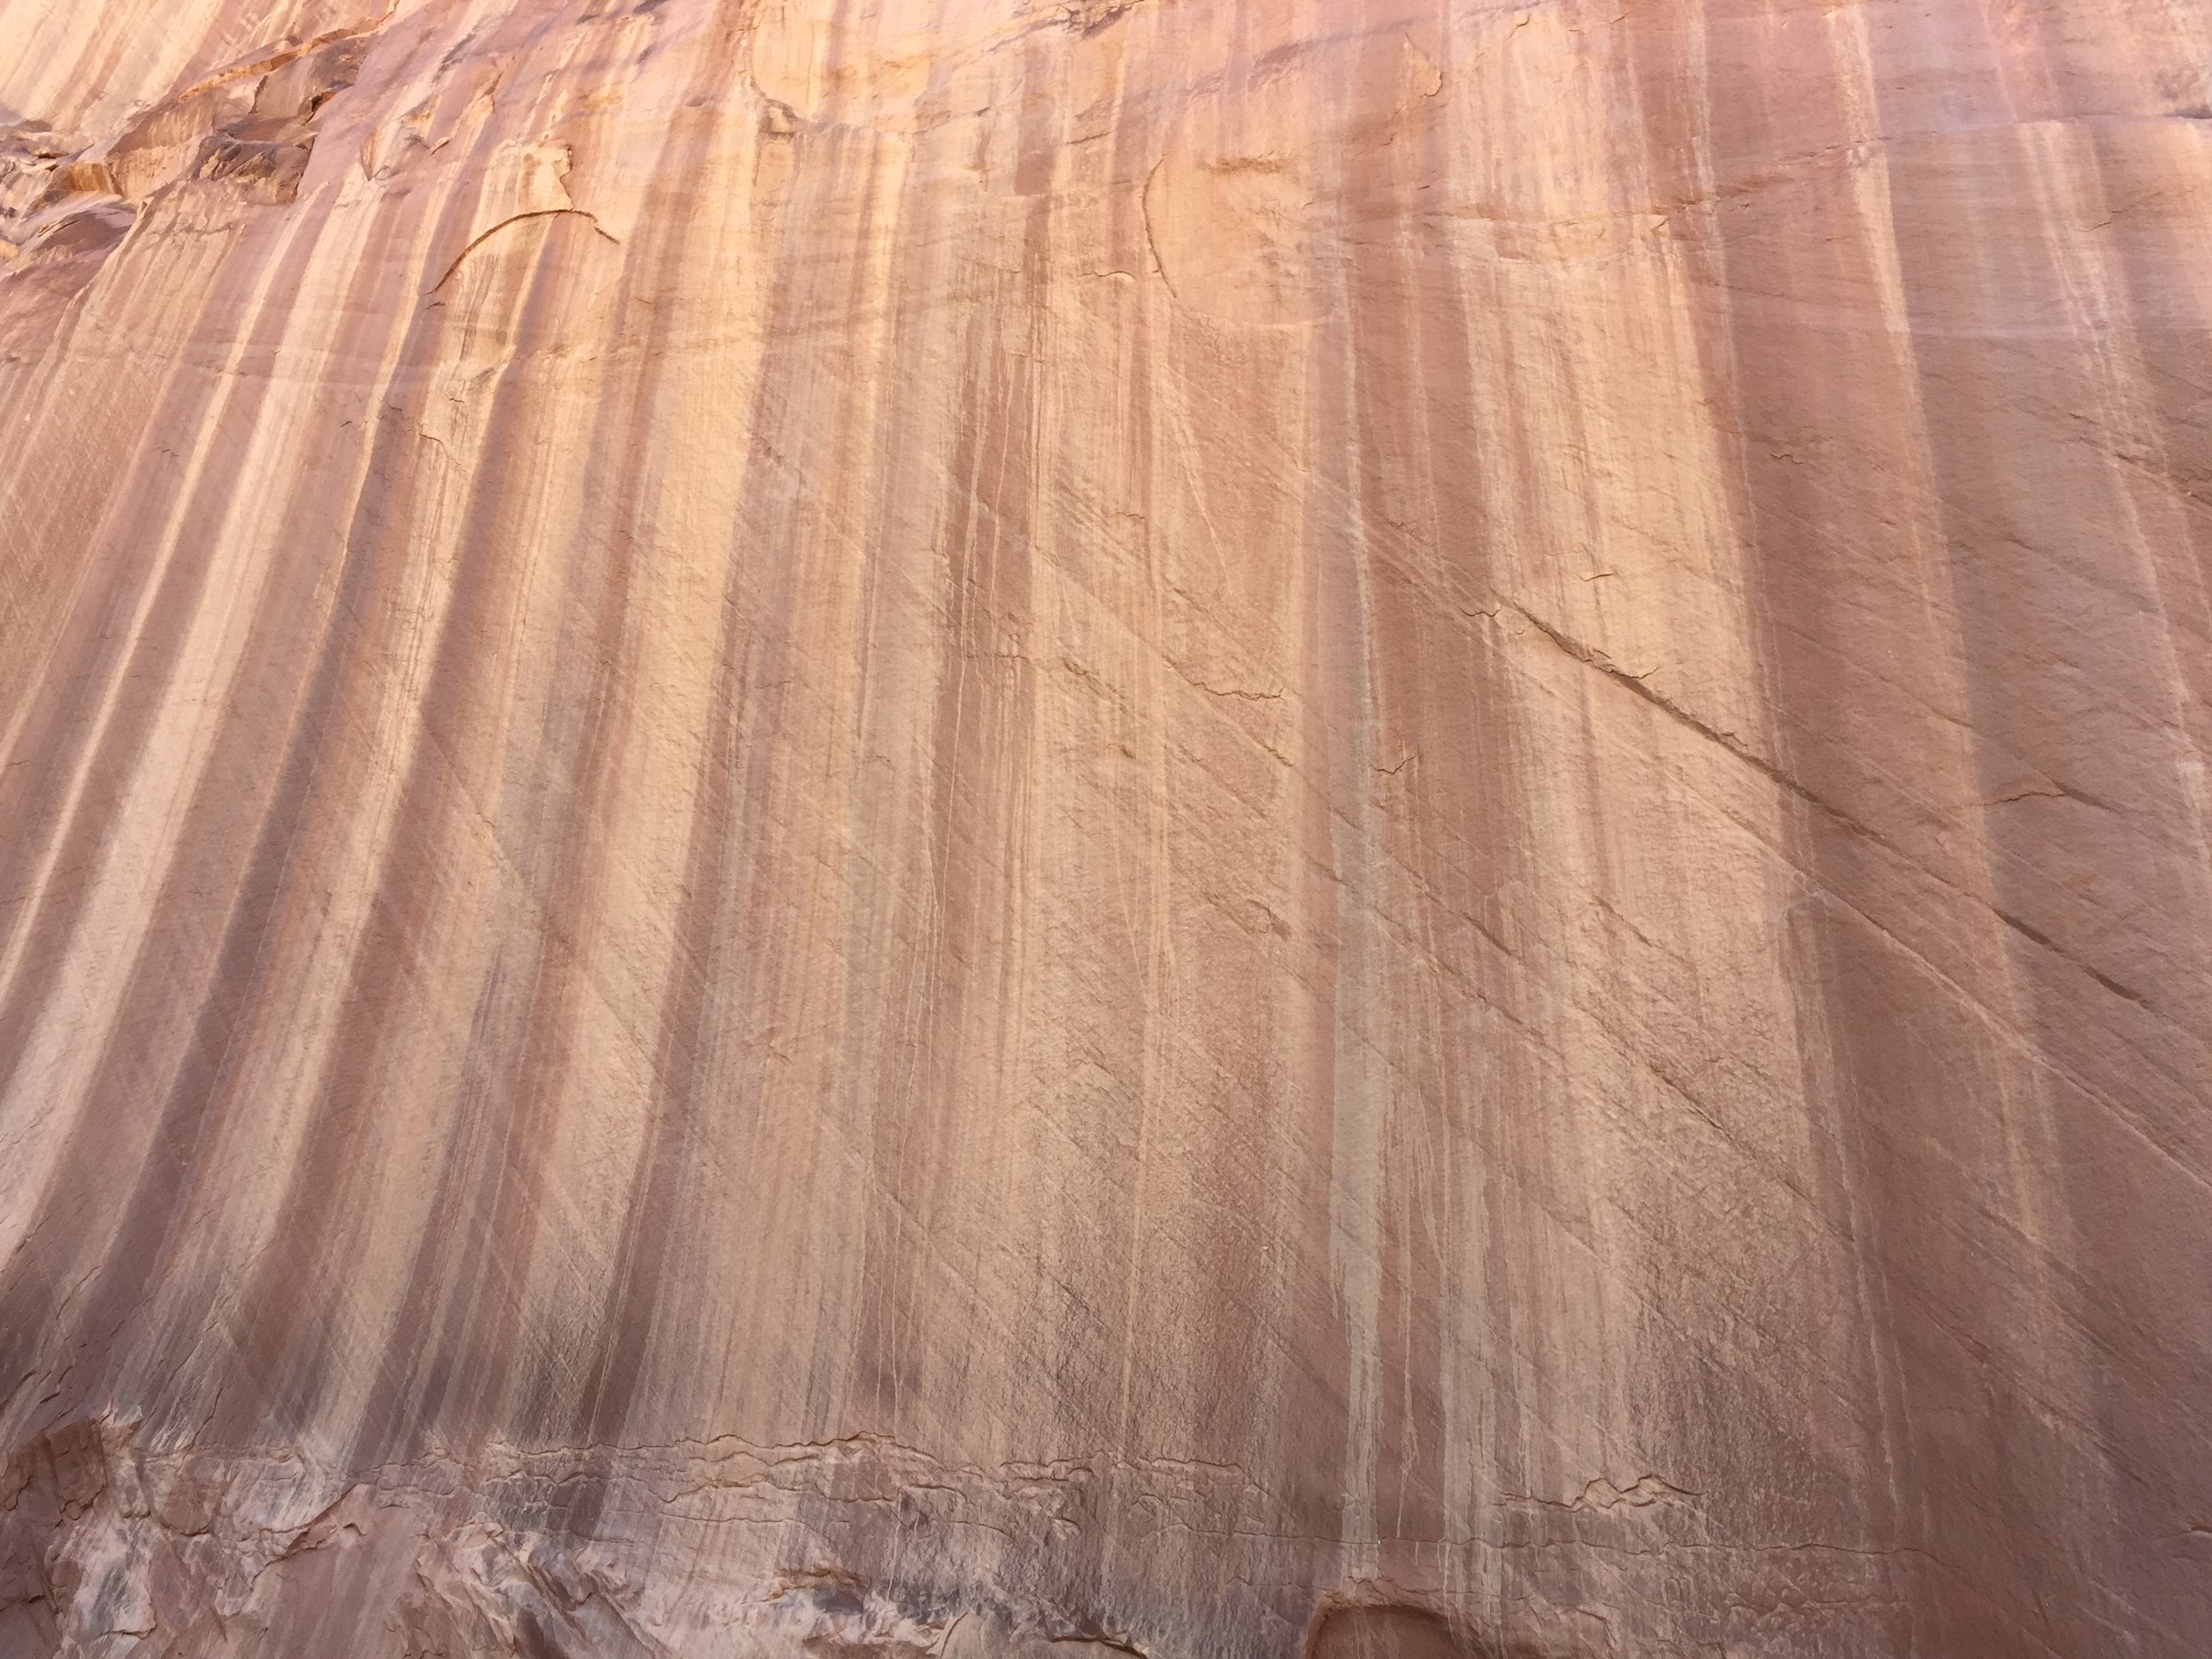   AUGUST, 2017 – CAPITOL REEF NATIONAL PARK: Here a rocky painting tells a story of the earth’s history, with each band representing different time periods, different materials, and different forces of erosion.  